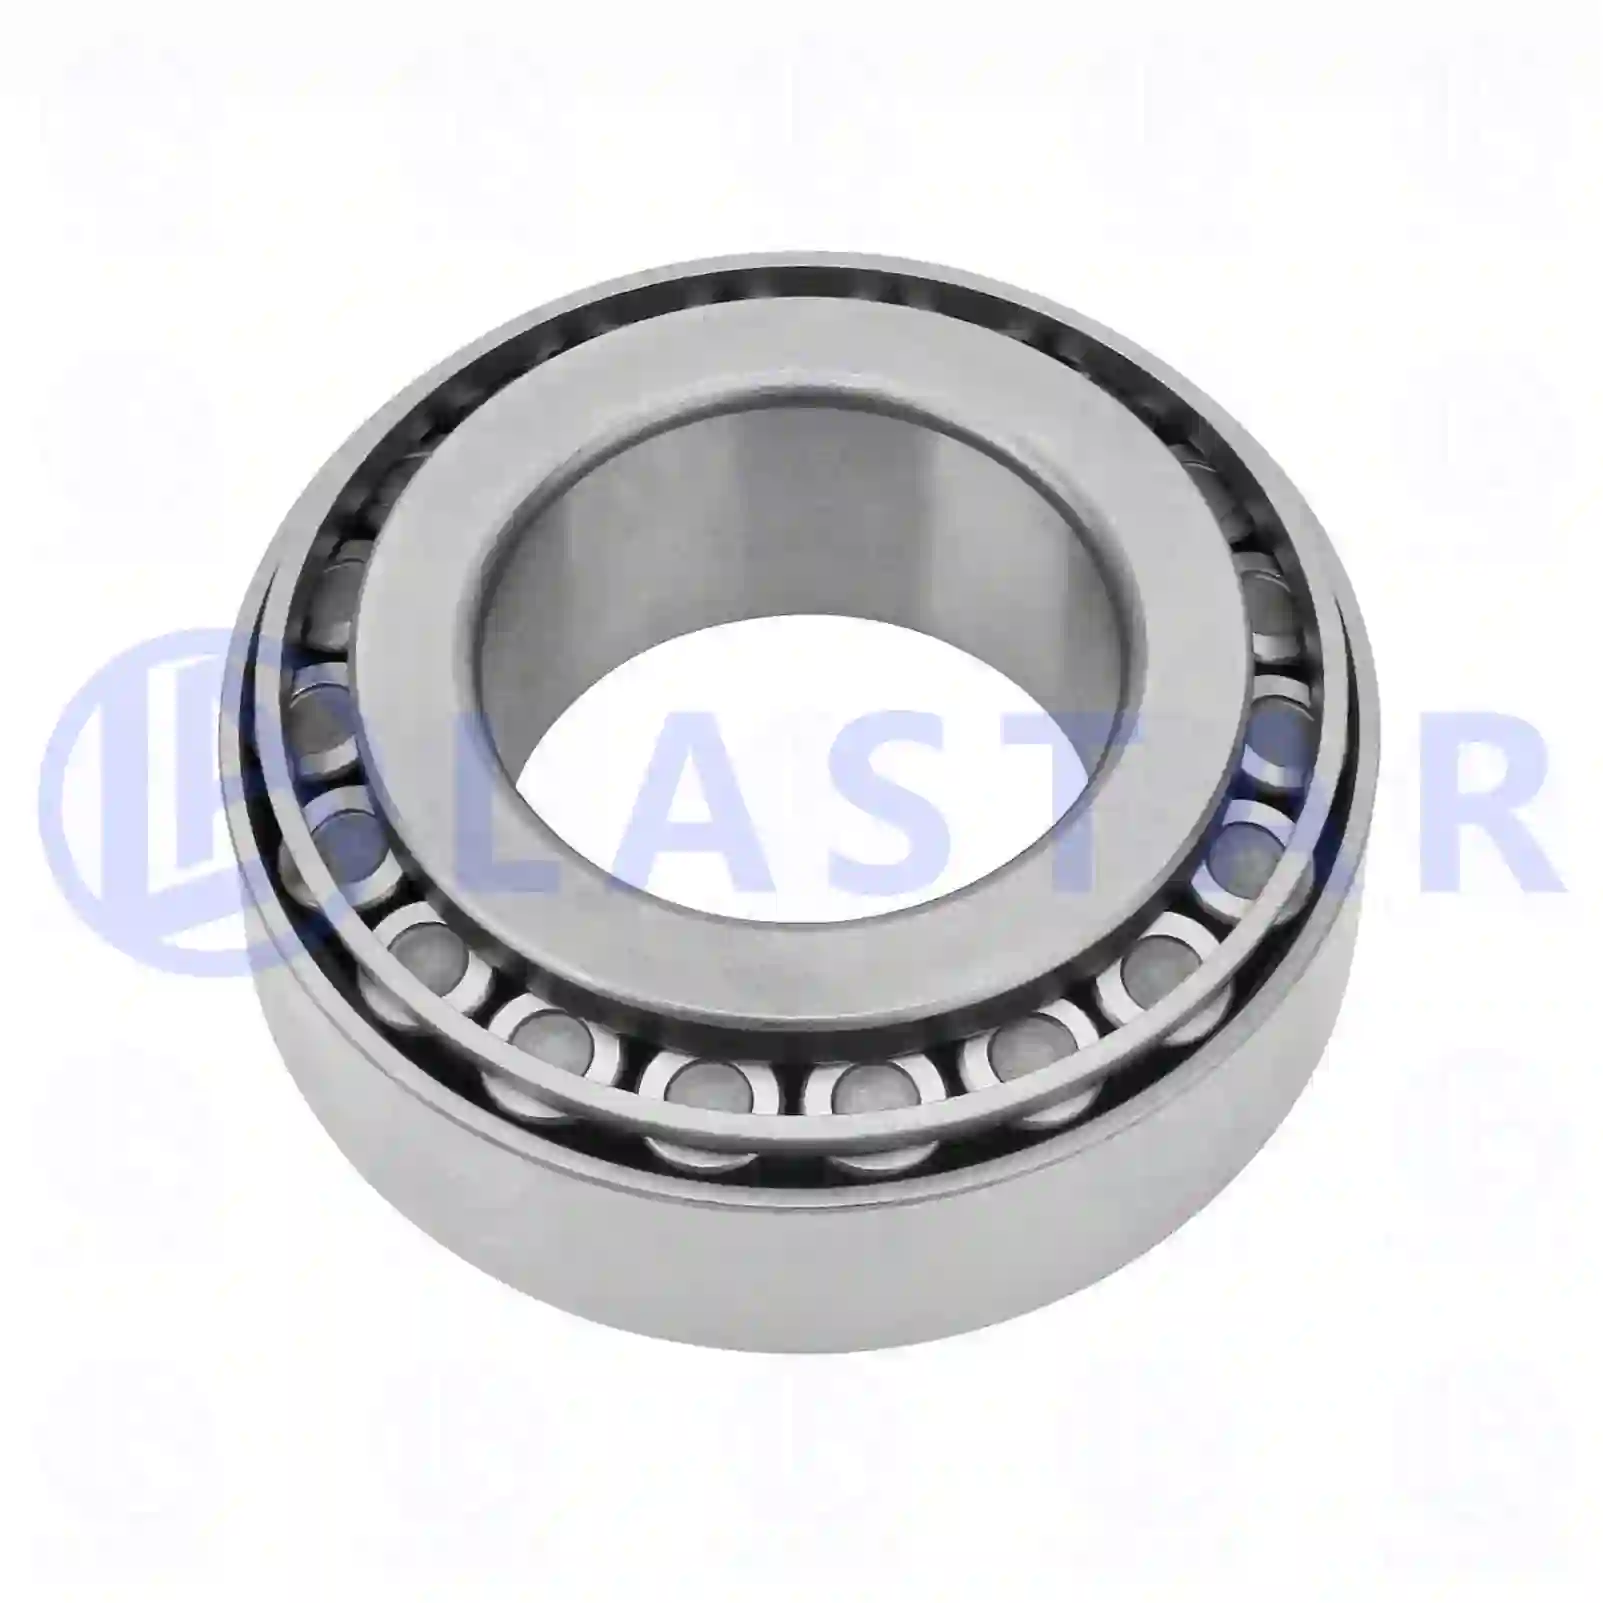 Bearings Tapered roller bearing, la no: 77725199 ,  oem no:0264076500, 0264076700, 0264102200, 06324890006, 06324890046, 0019800902, 0039813705, 0039817405, 0069816305, 5000437791, 5010368899, 5010368900, 5010439065, 99041045S, 4200006000, 184672, ZG03004-0008 Lastar Spare Part | Truck Spare Parts, Auotomotive Spare Parts